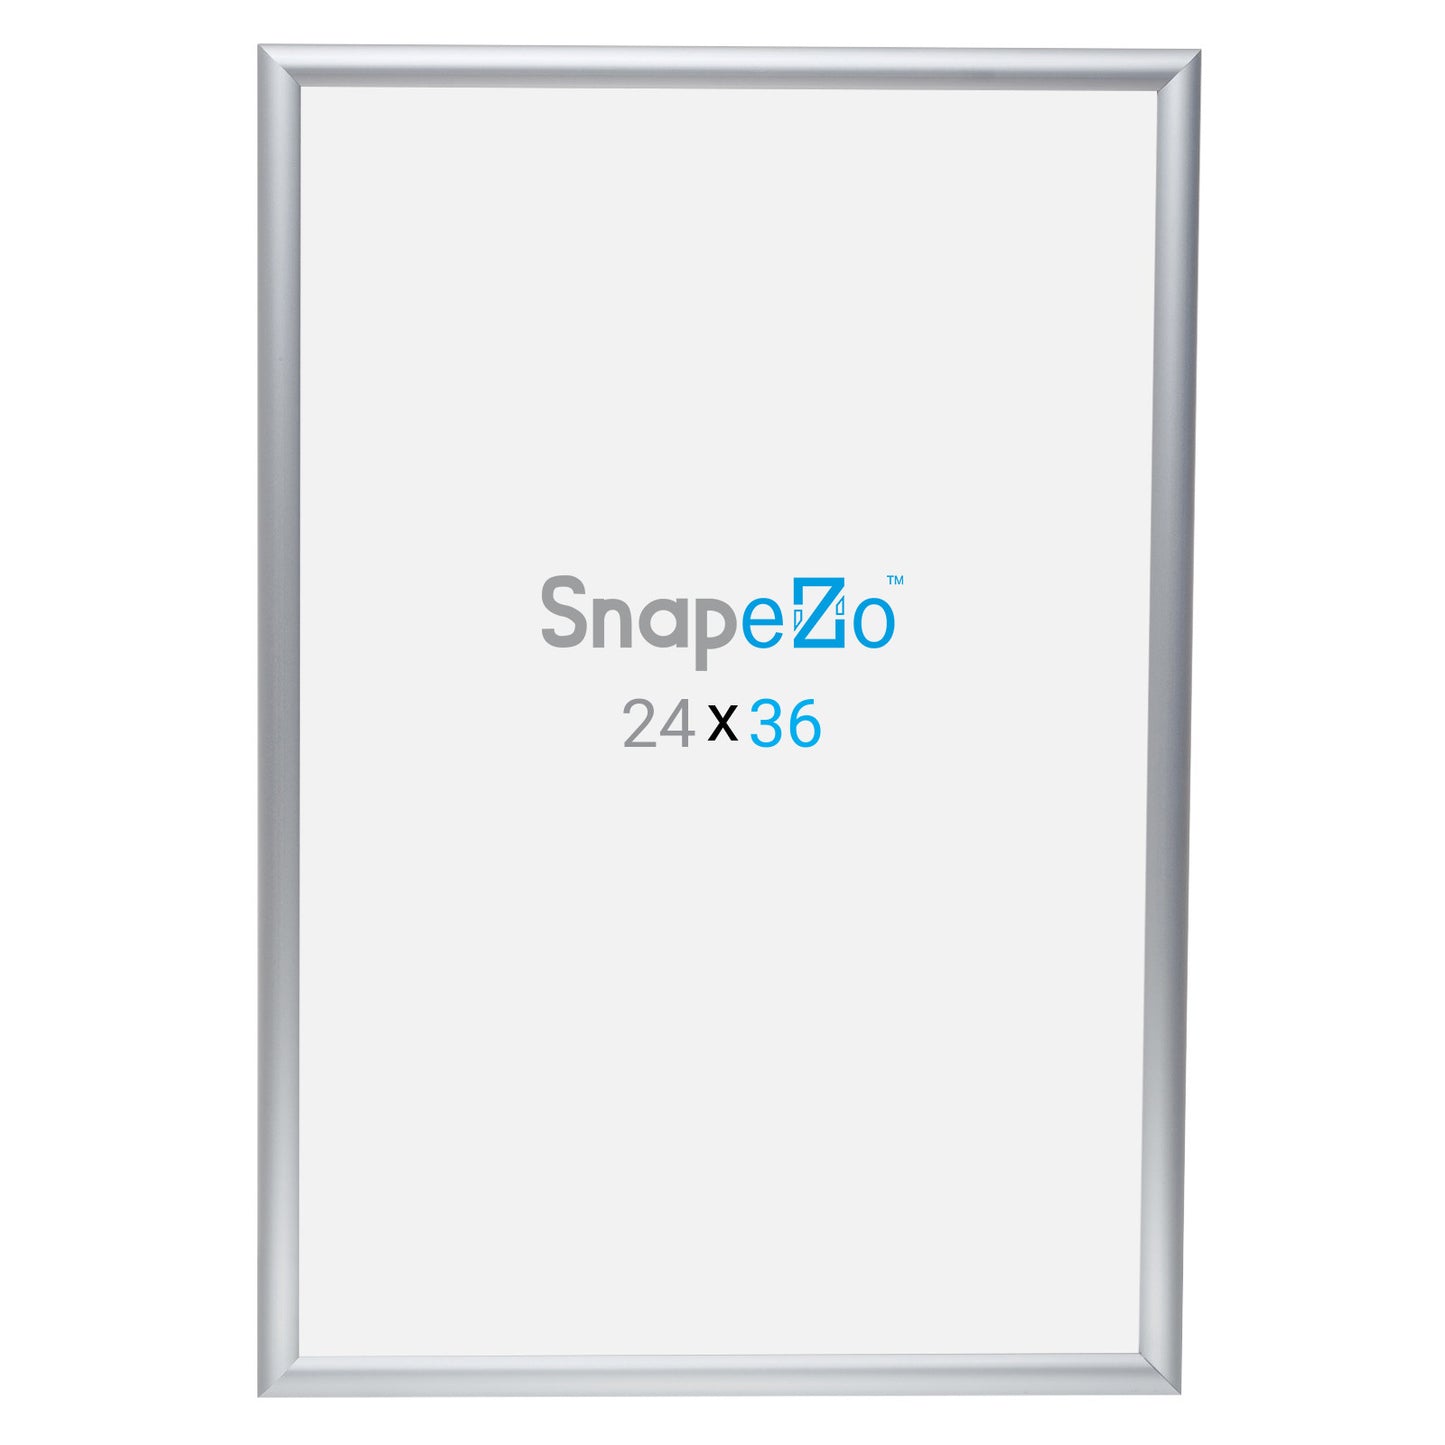 5 Case Pack of Snapezo® of Silver 24x36 Movie Poster Frame - 1" Profile